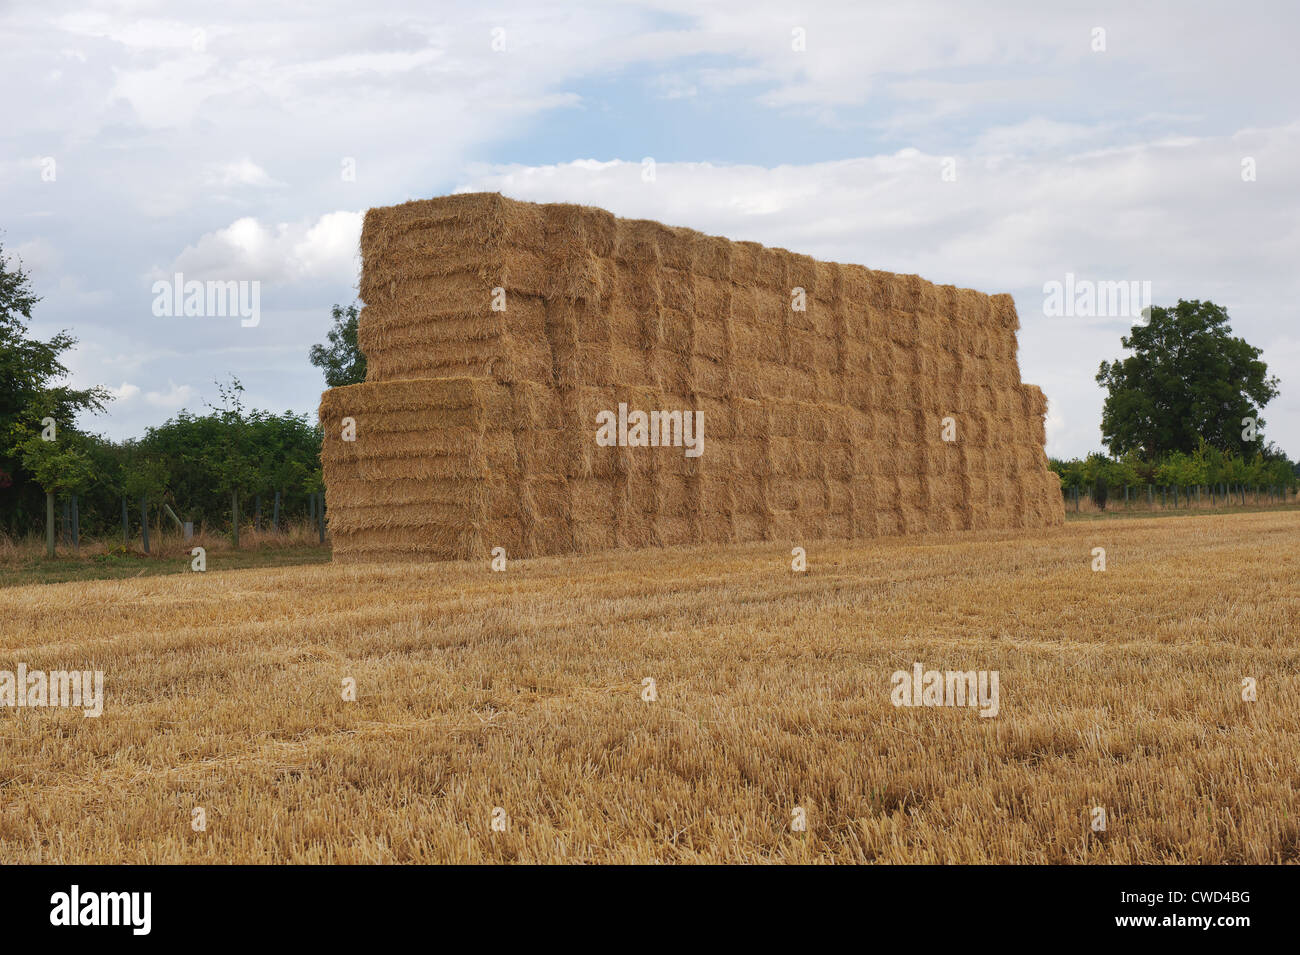 Giant hay stack recently gathered from a wheat field in rural Oxfordshire Stock Photo